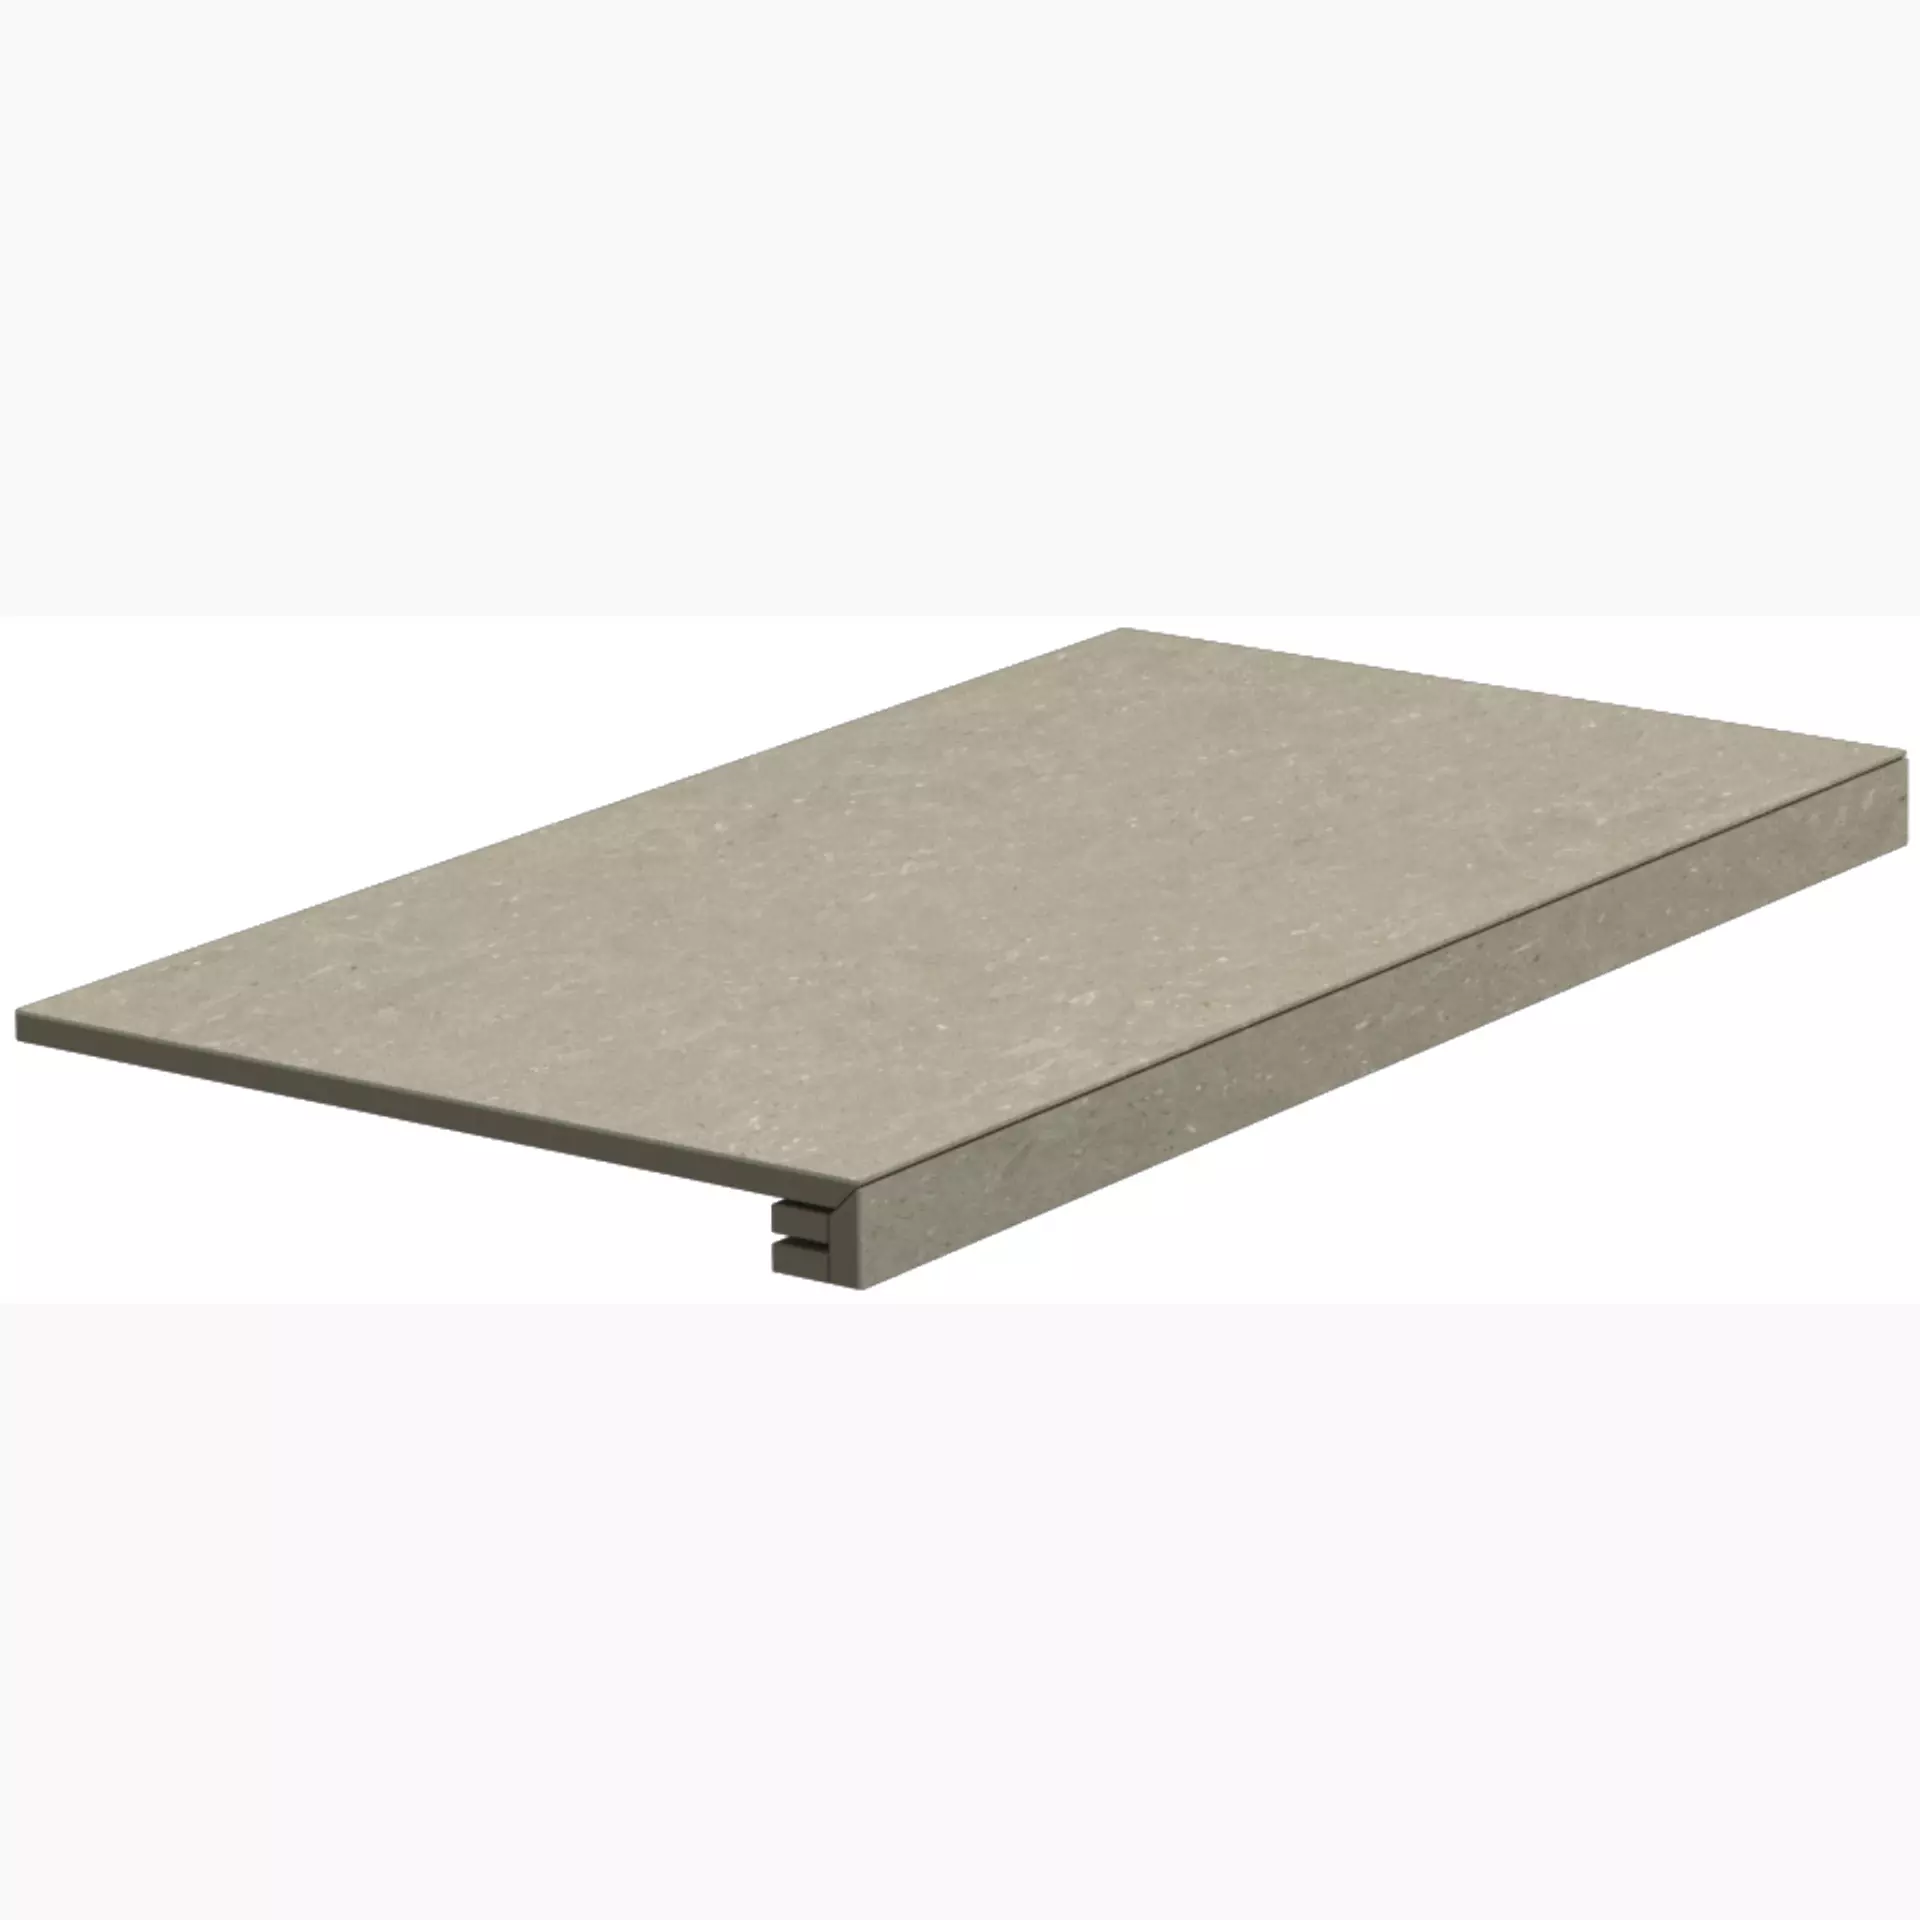 Del Conca Hwd Wild Greige Hwd11 Naturale Step plate Lineare G3WD11RG 33x60cm rectified 8,5mm